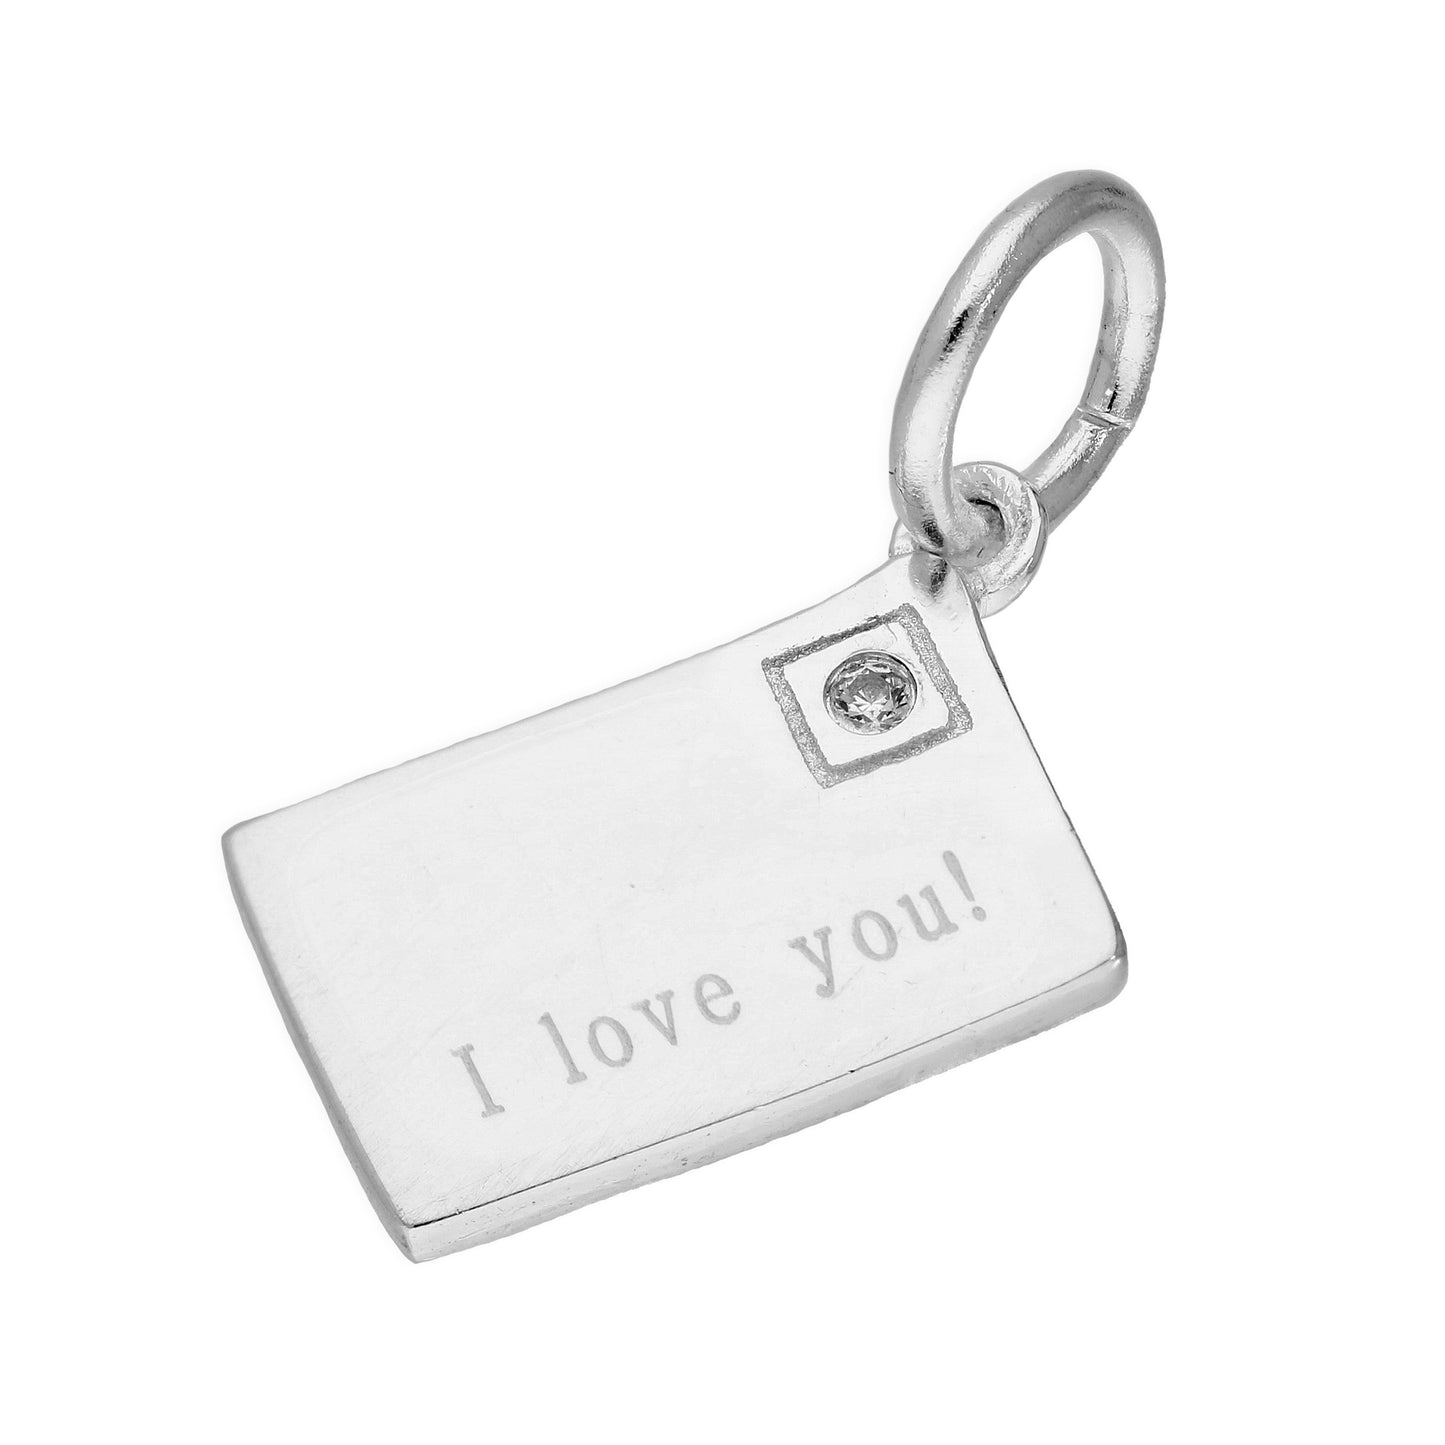 Sterling Silver I Love You Letter Charm